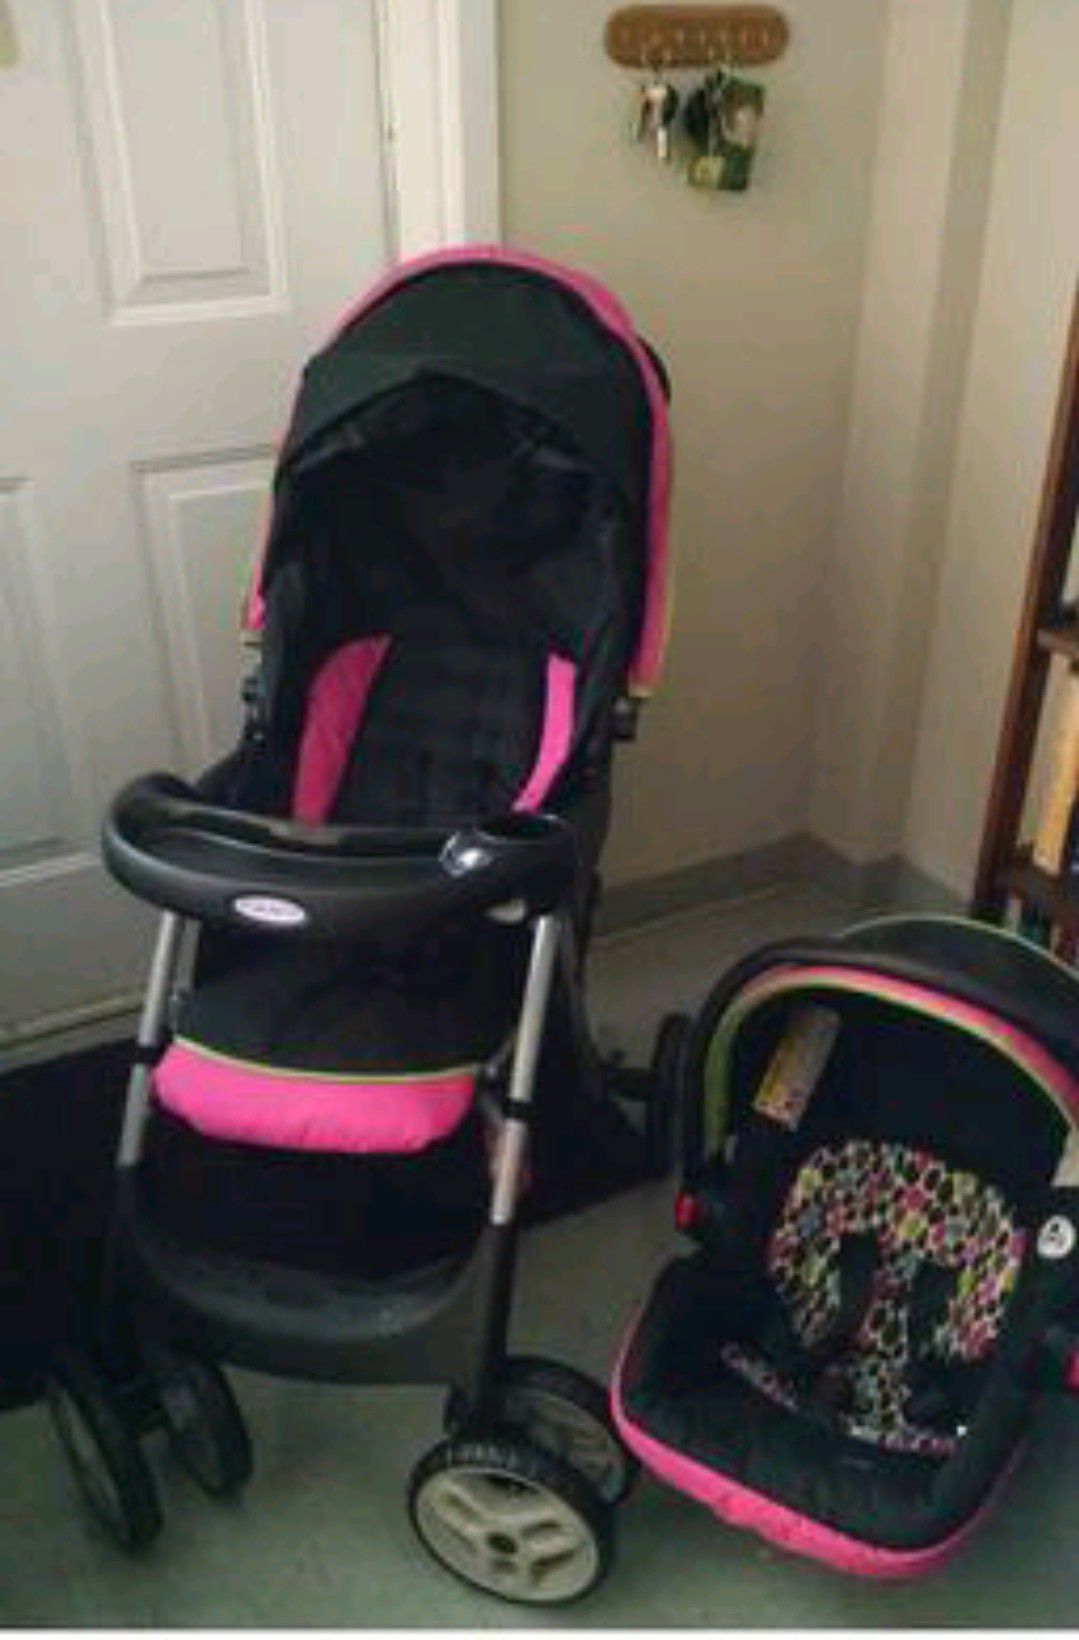 Baby girls graco car seat and stroller set great condition